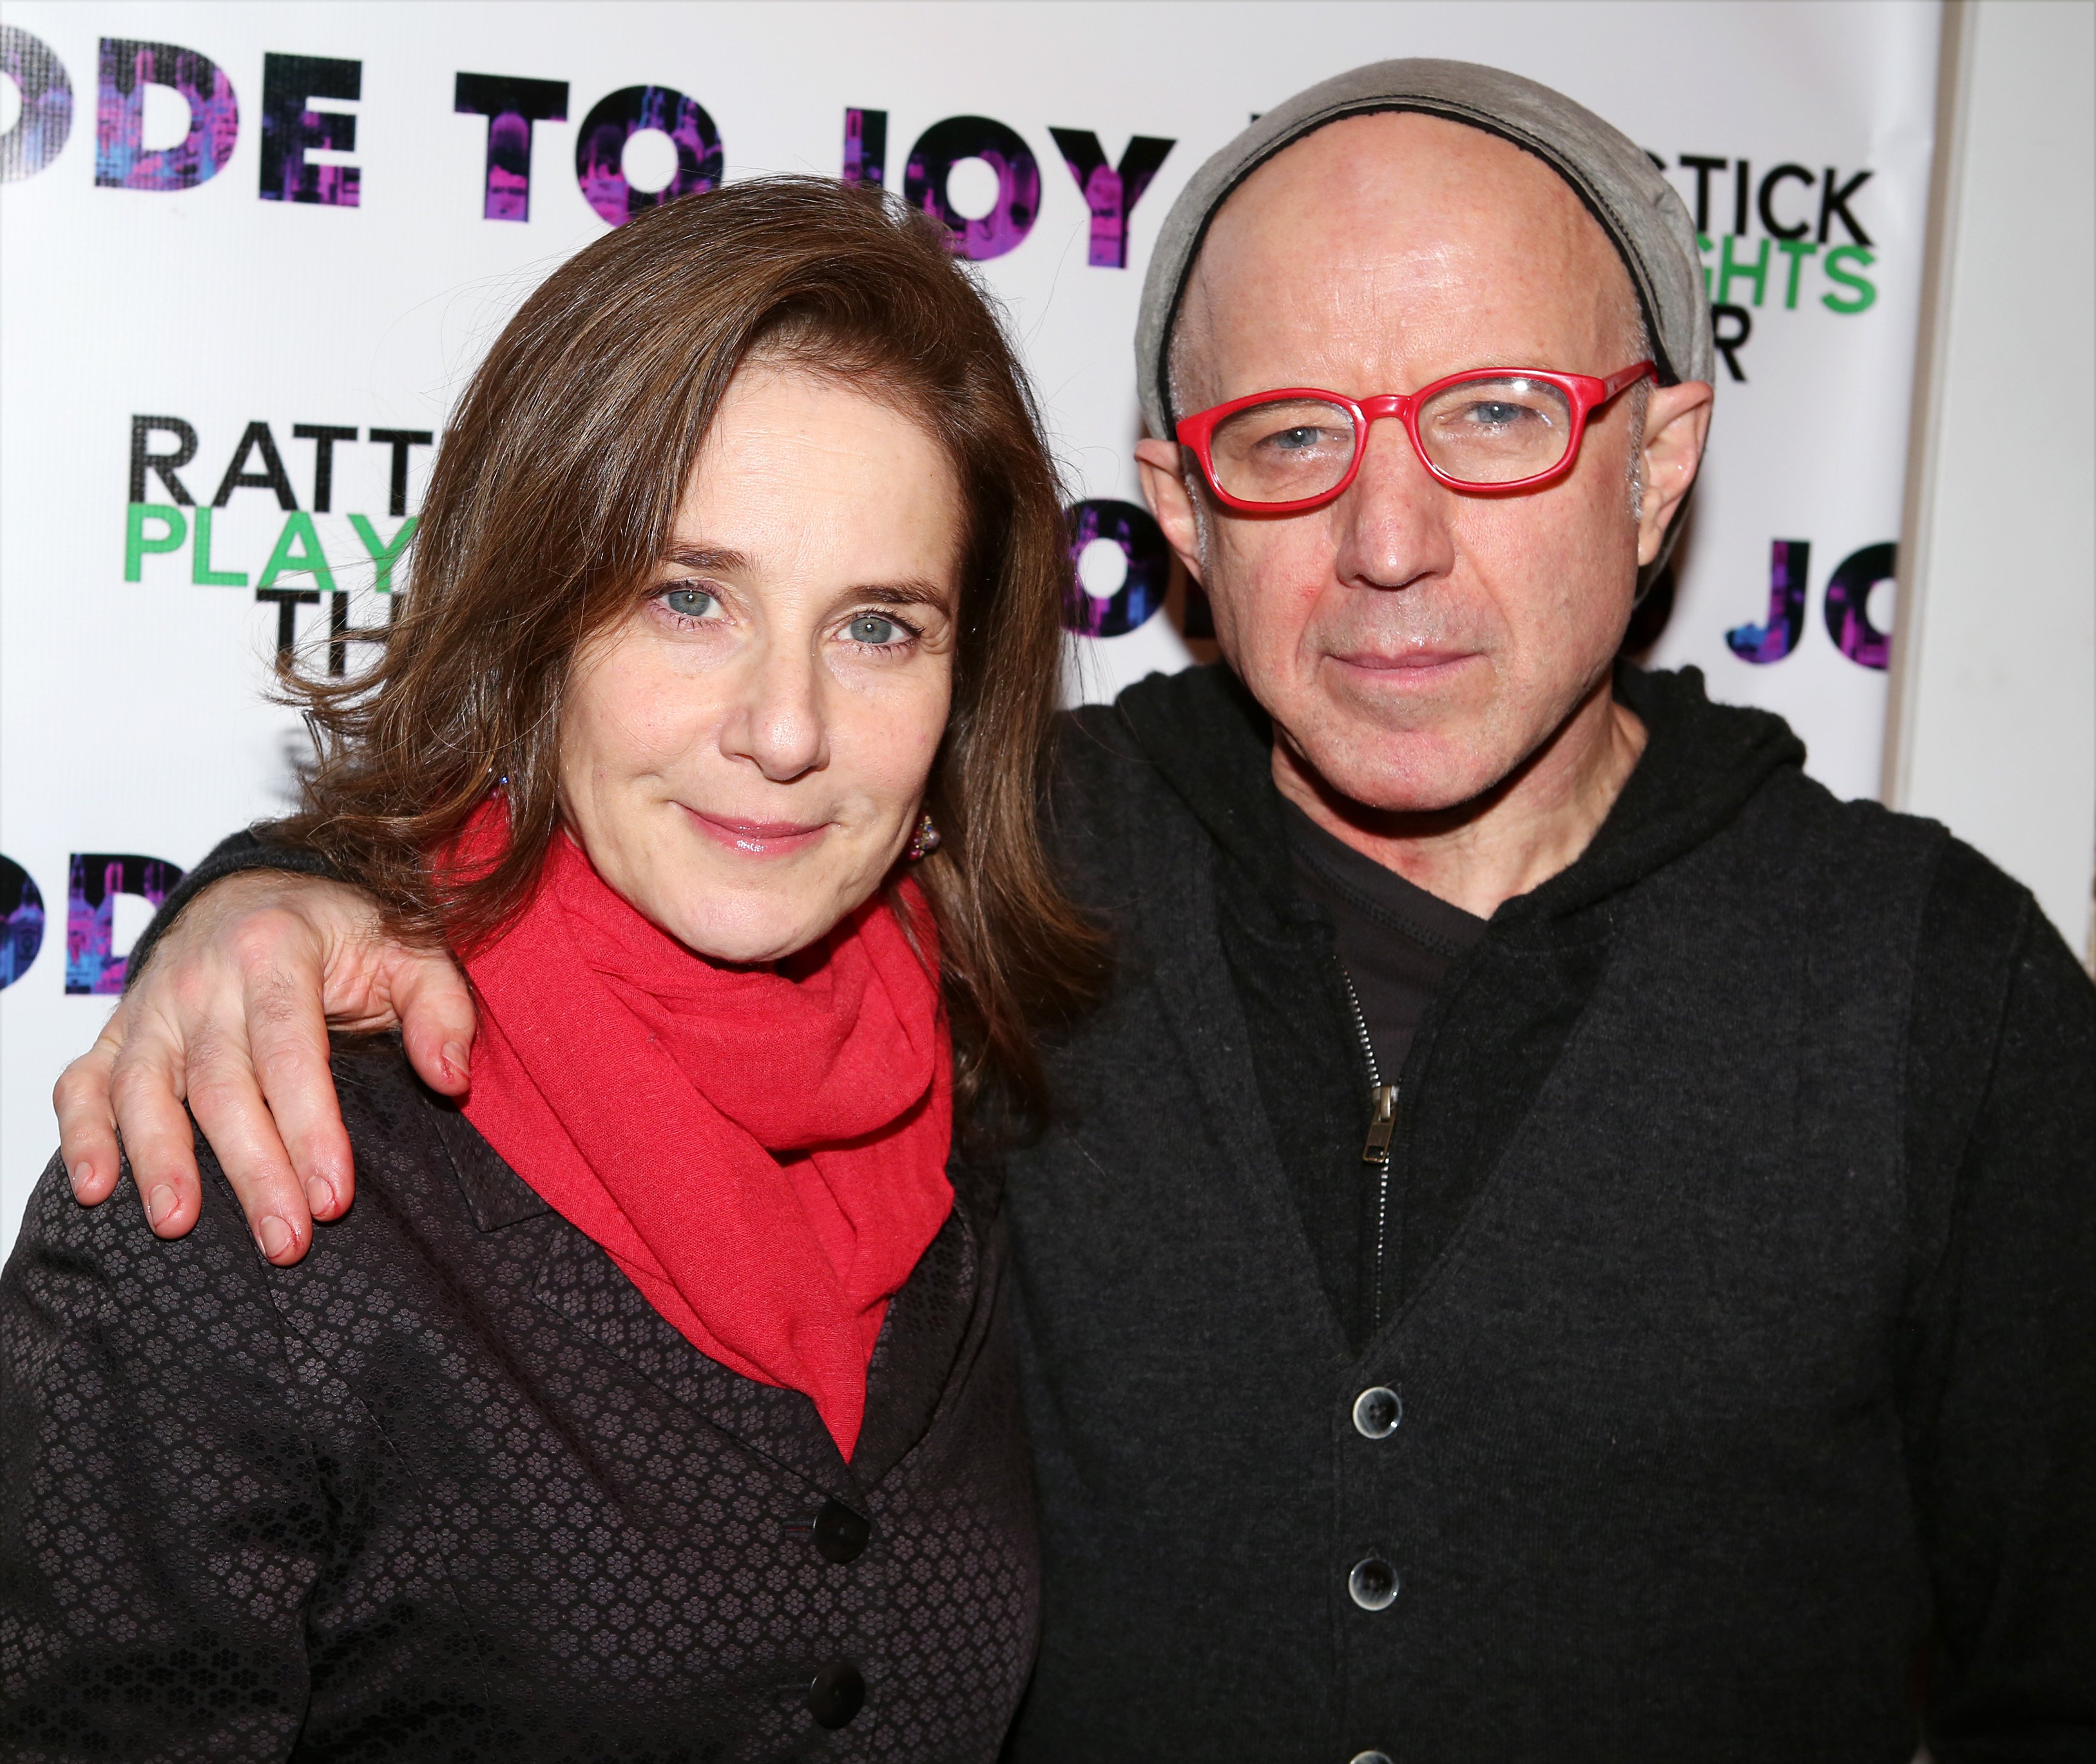 Debra Winger and Arliss Howard at the opening night of "Ode To Joy" on February 27, 2014, in New York | Source: Getty Images